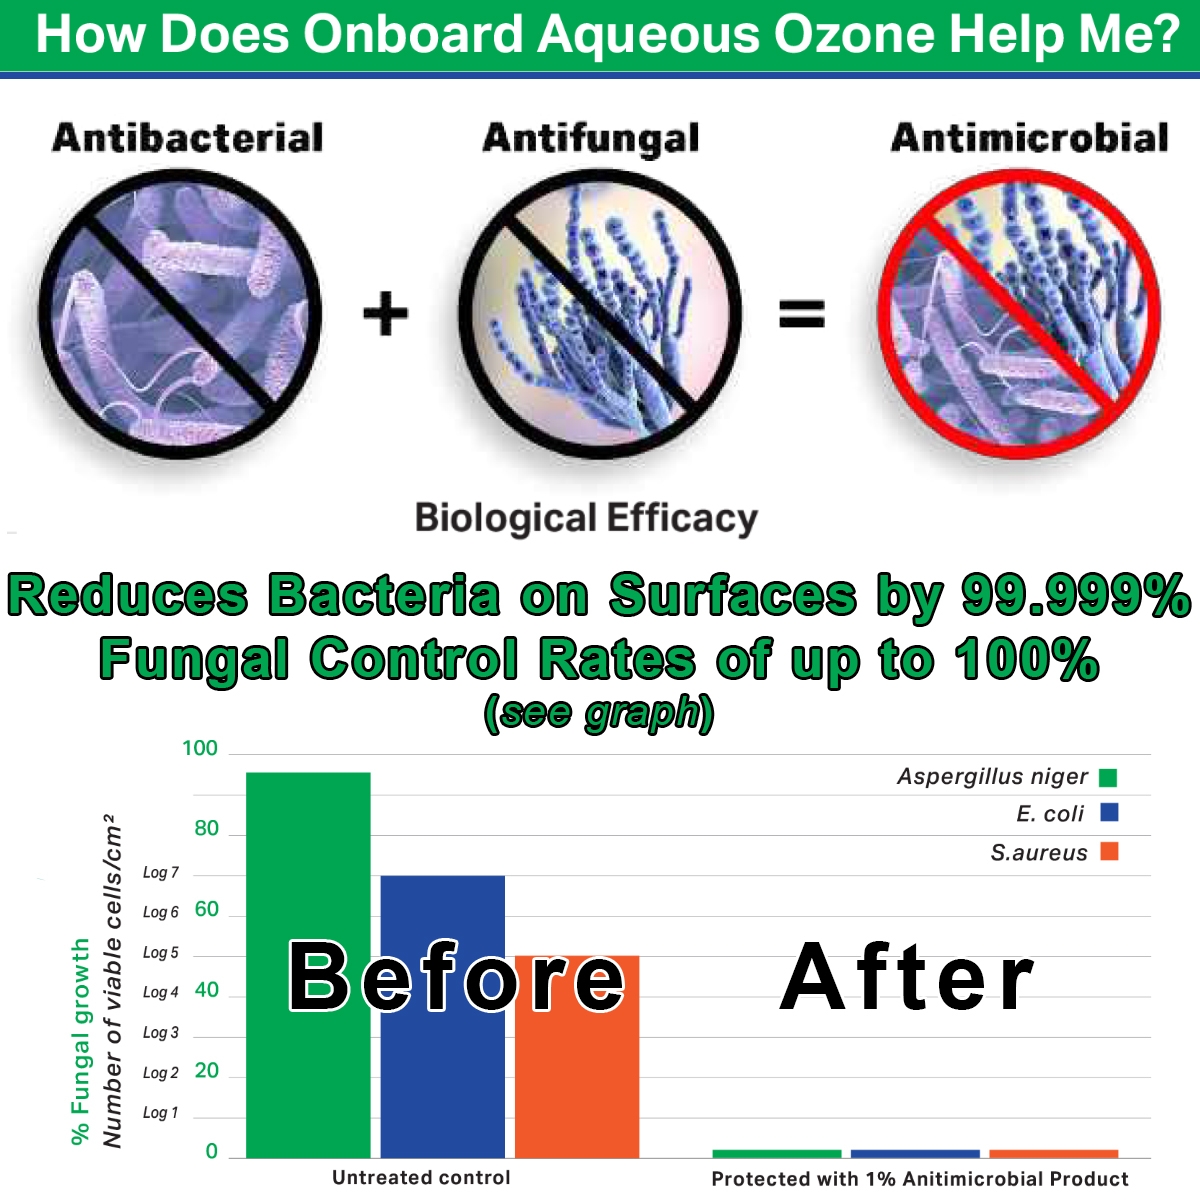 Ozone is a powerful sanitizer, disinfectant and oxidizer. Aqueous Ozone at 1 ppm (mg/L) is equivalent to 10 - 4,000
times the concentration of free chlorine, with the right pH, temperature and Micro-Organisms [